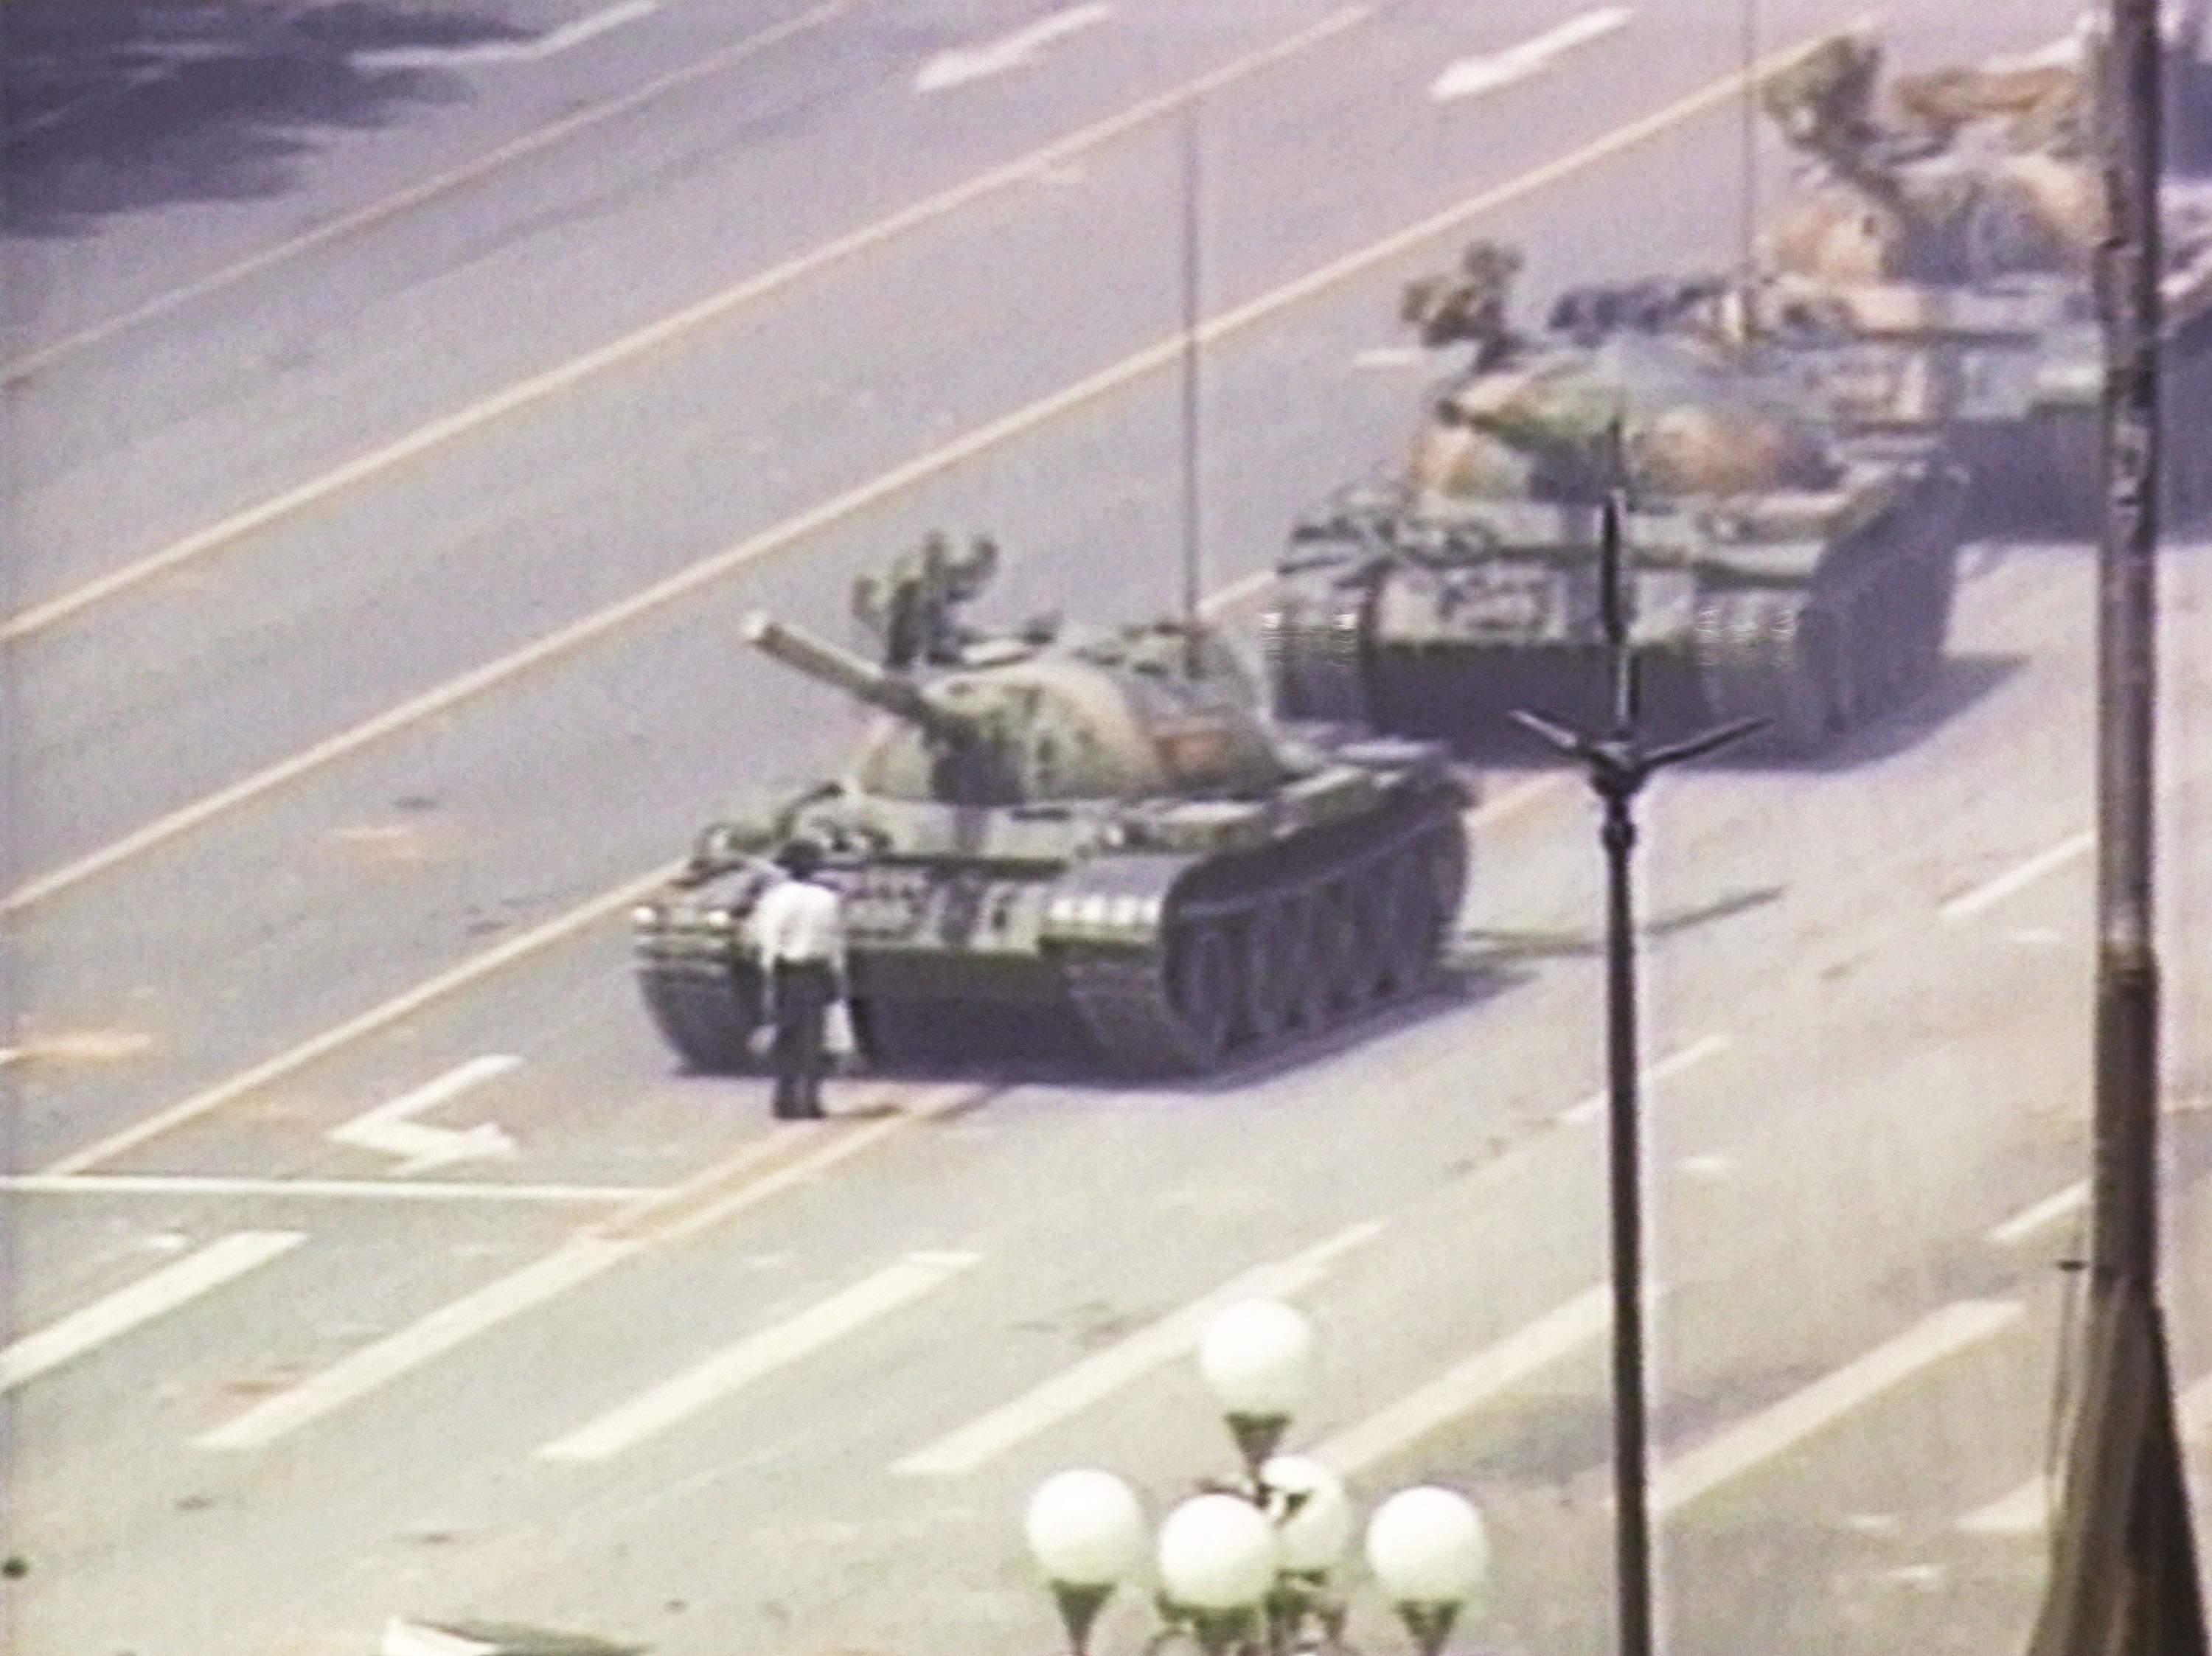 The photograph of ‘tank man’ - taken on 5 June in Tiananmen Square, became one of the most iconic images of modern history.